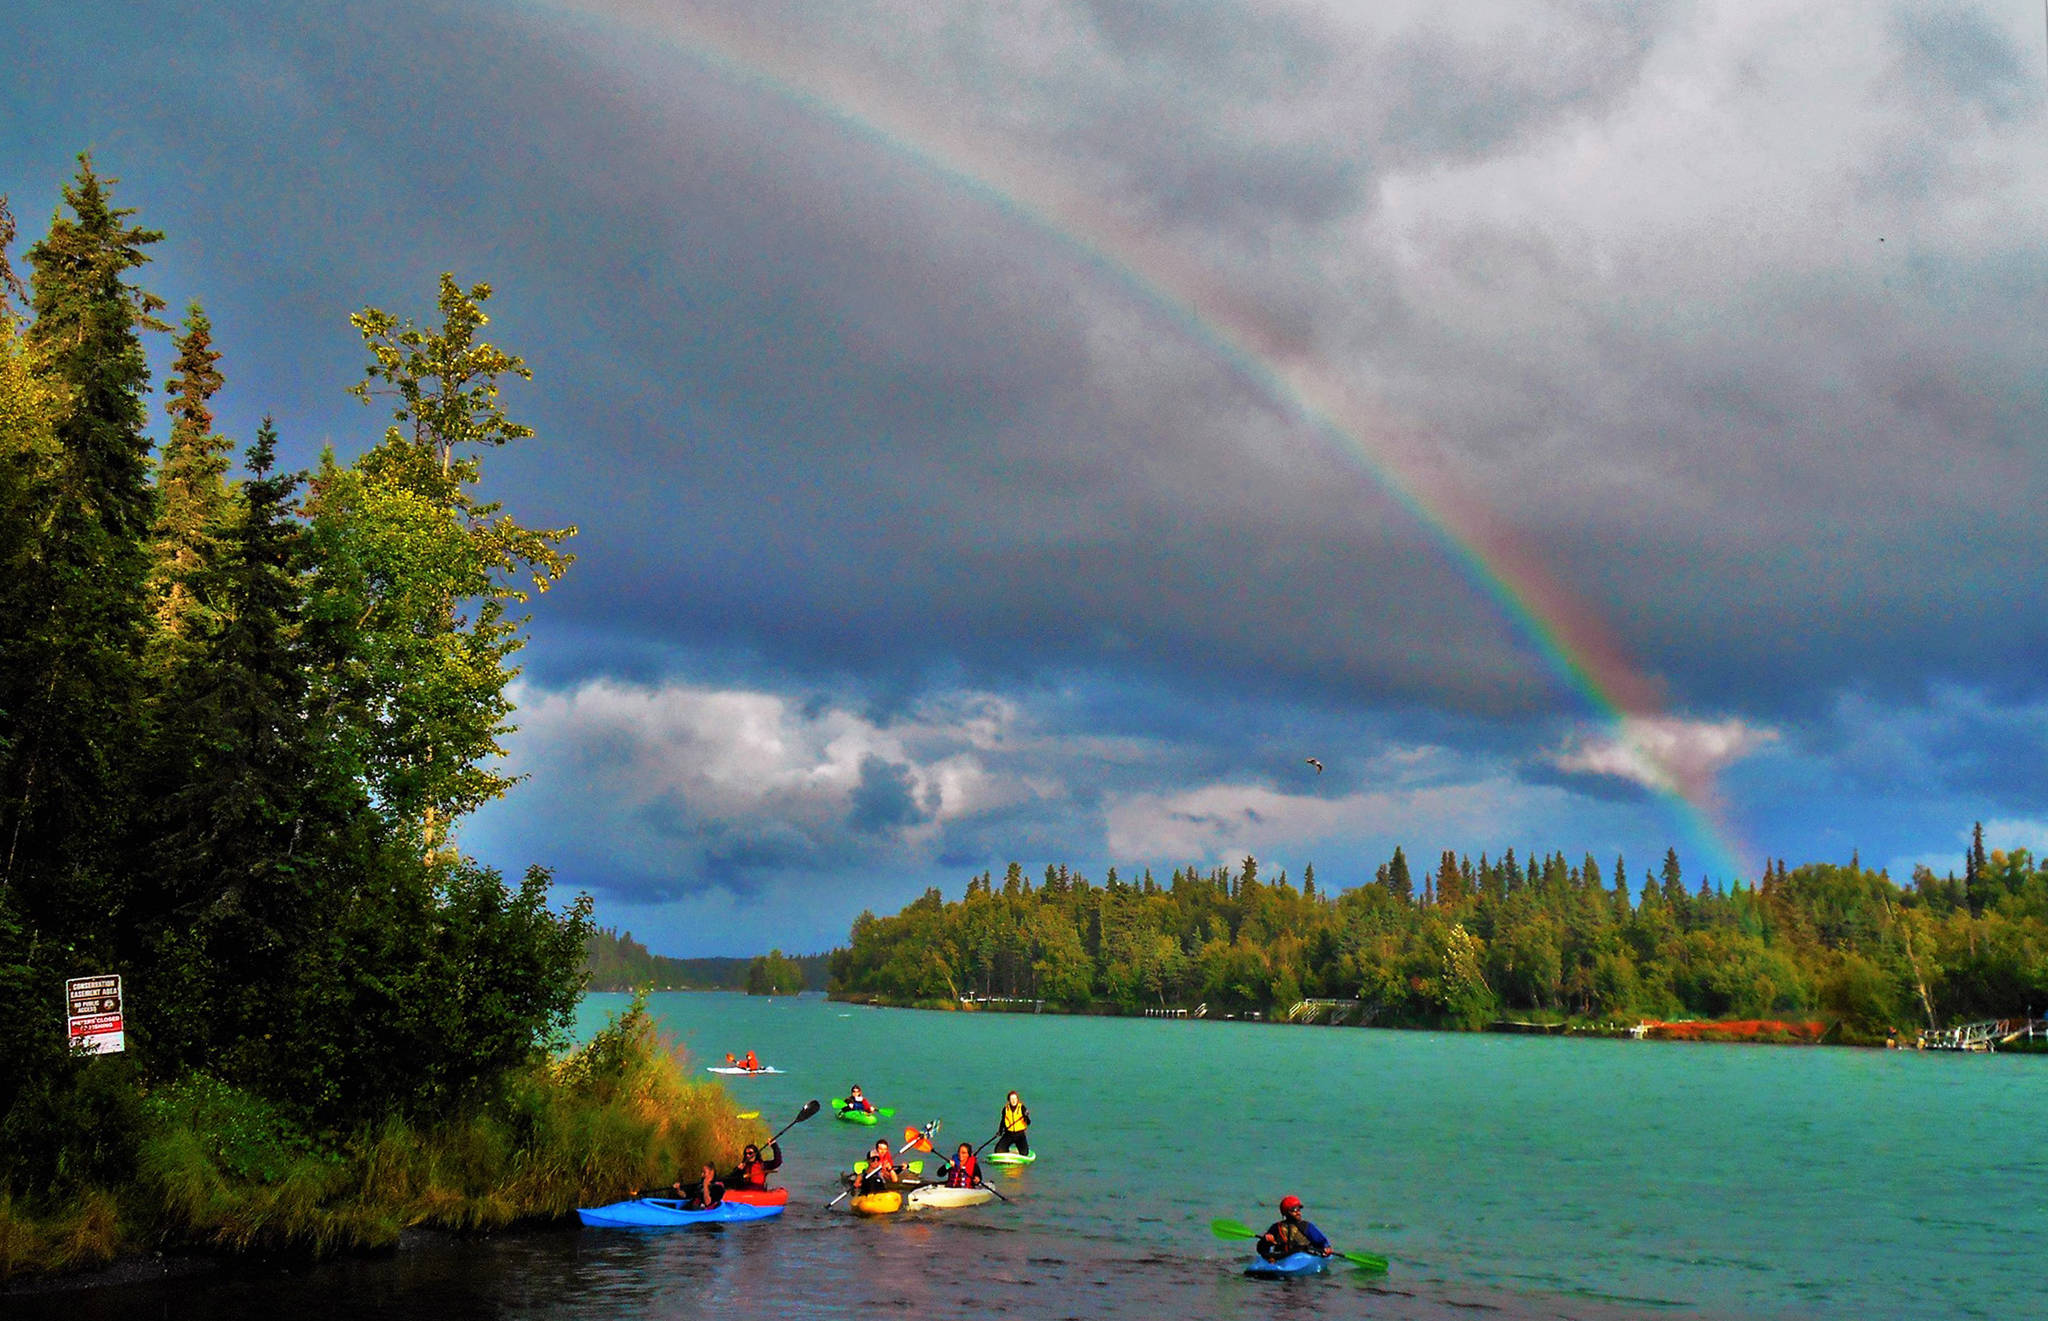 The arc of a clear rainbow with a faint second rainbow above it glows over the Kenai River as a group of kayakers pull into the mouth of Soldotna Creek on Wednesday, Aug. 16, 2017 in Soldotna, Alaska. Spotty rain showers in the central Kenai Peninsula area made for a wet day Wednesday, but the clouds parted enough in the evening to allow a little sunshine through to light up the Wednesday Market in Soldotna Creek Park. More clouds descended Thursday morning, though, with occasional spurts of rain predicted for Friday through Sunday with highs in the upper 50s and lows in the high 40s. (Photo courtesy Jennifer Lynn)